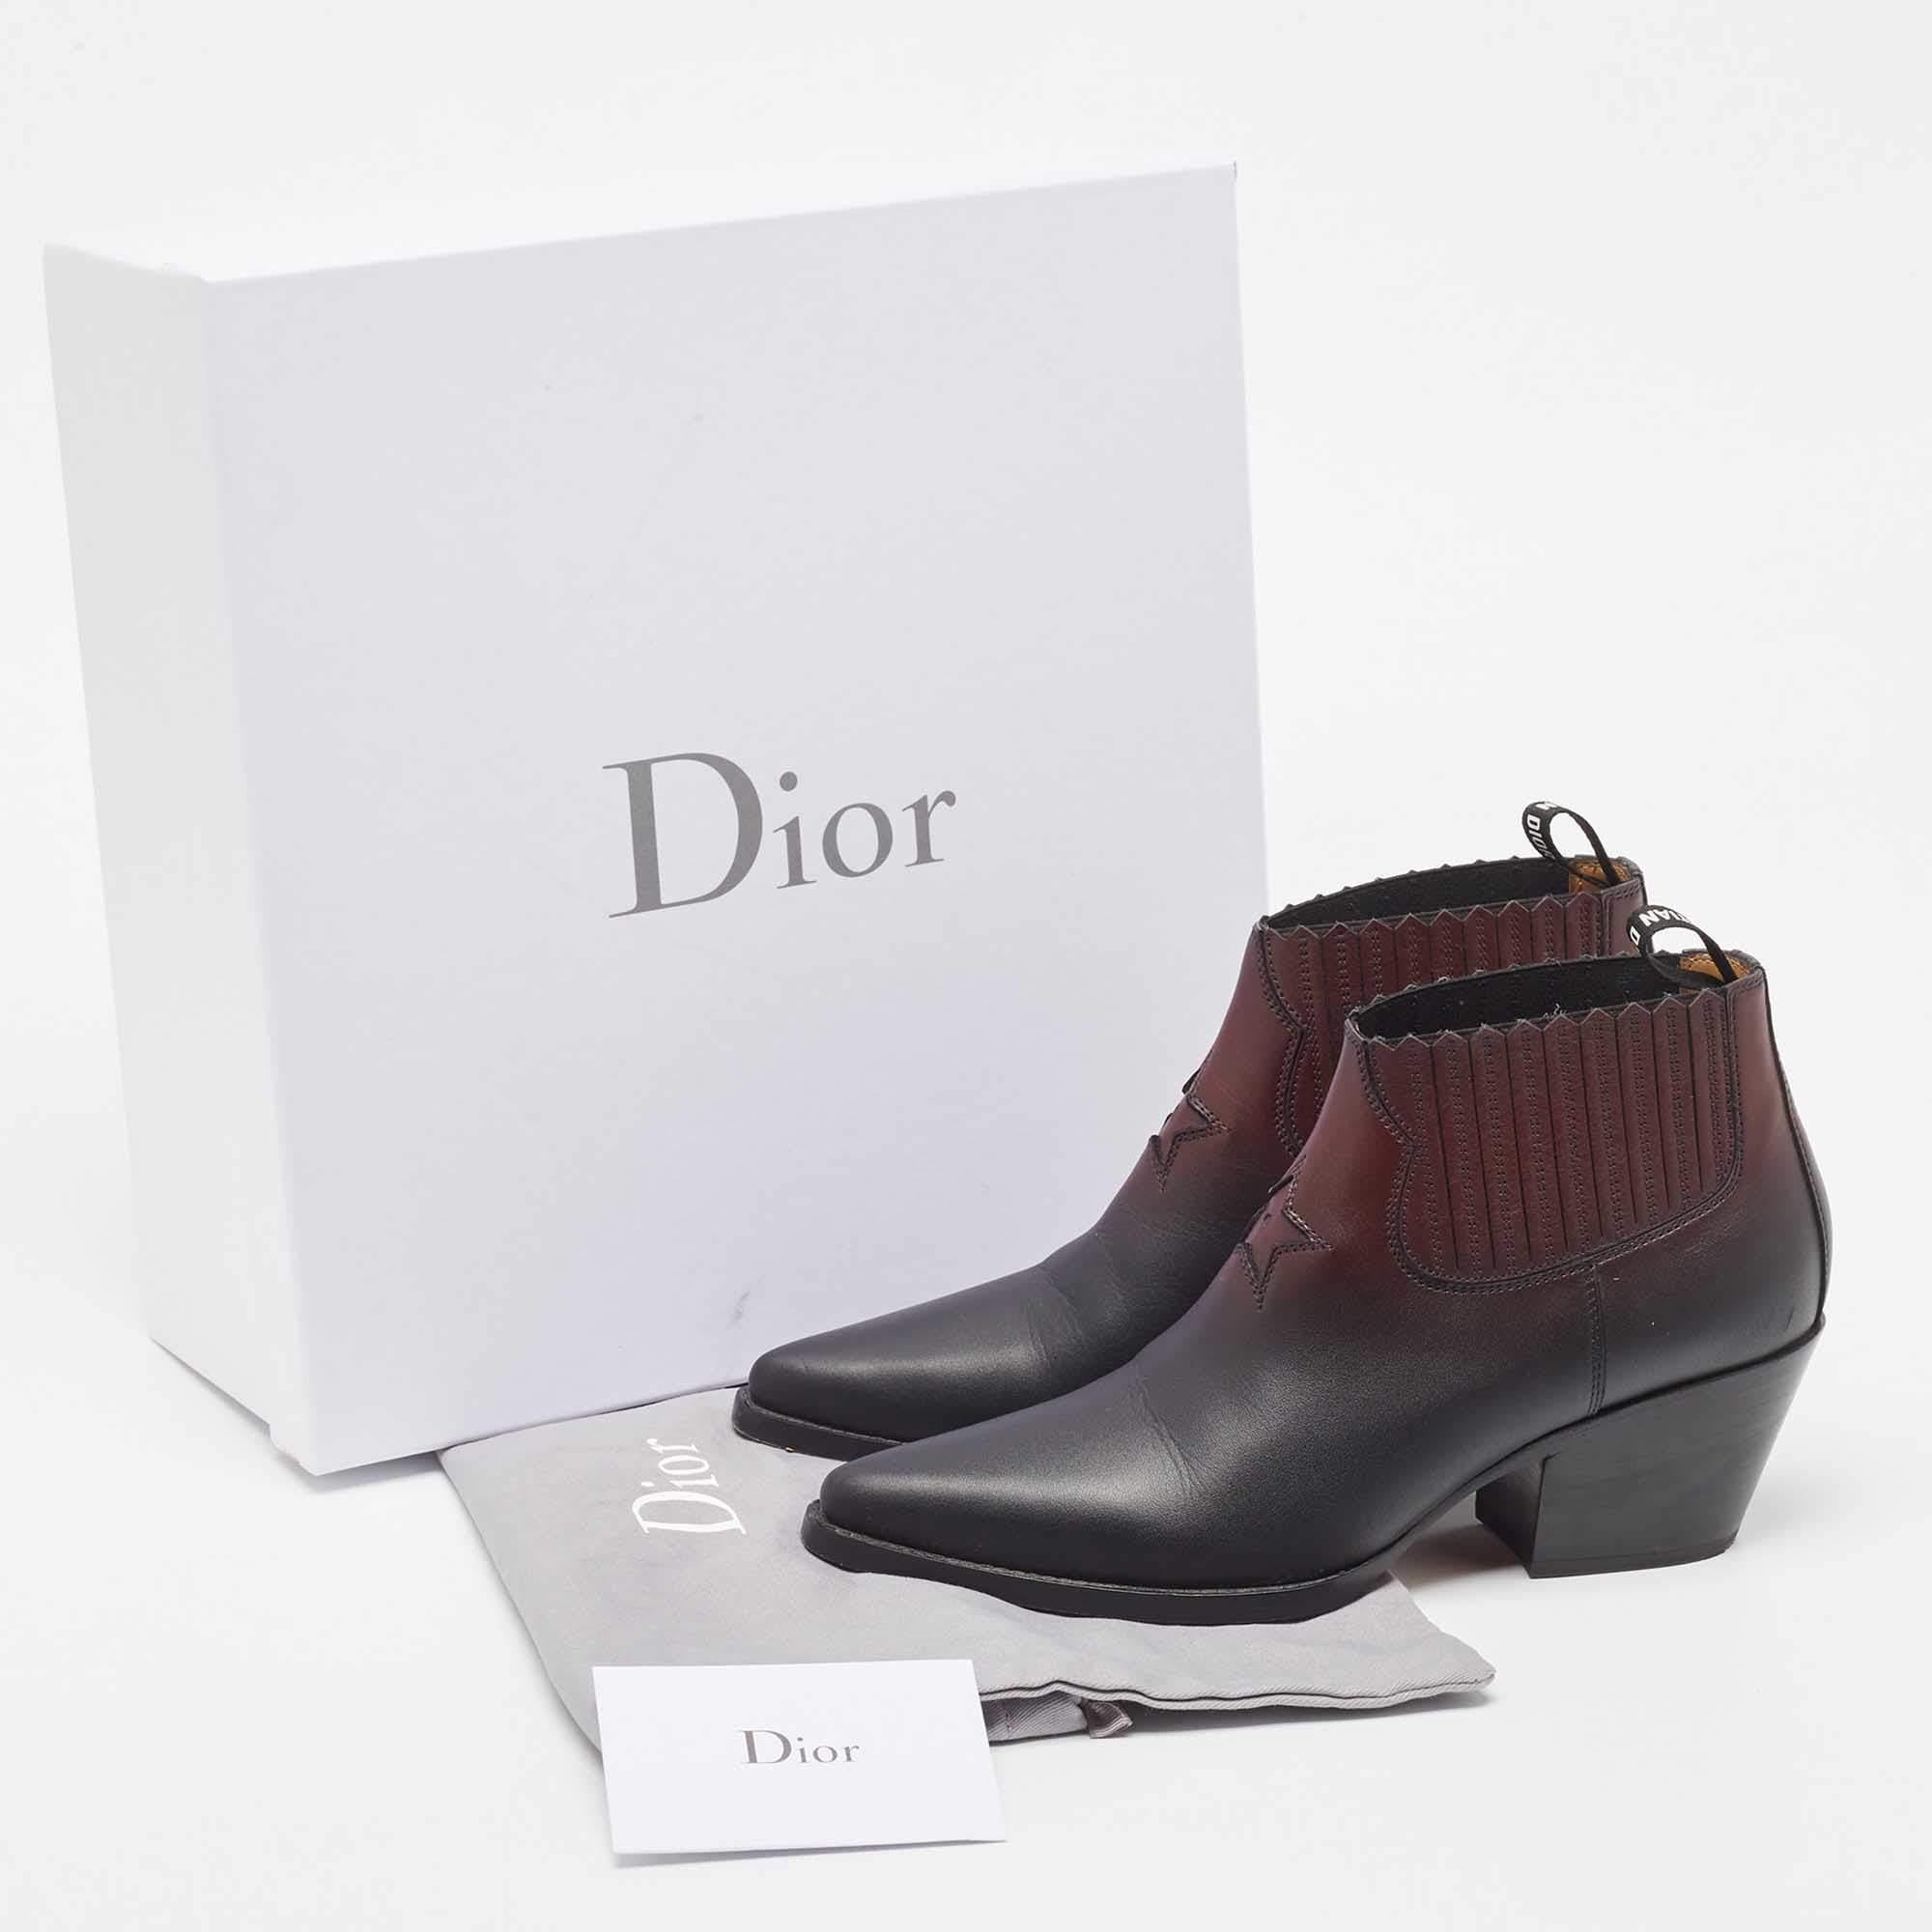 Dior Black/Burgundy Leather Dior L.A Ankle Boots Size 38 5